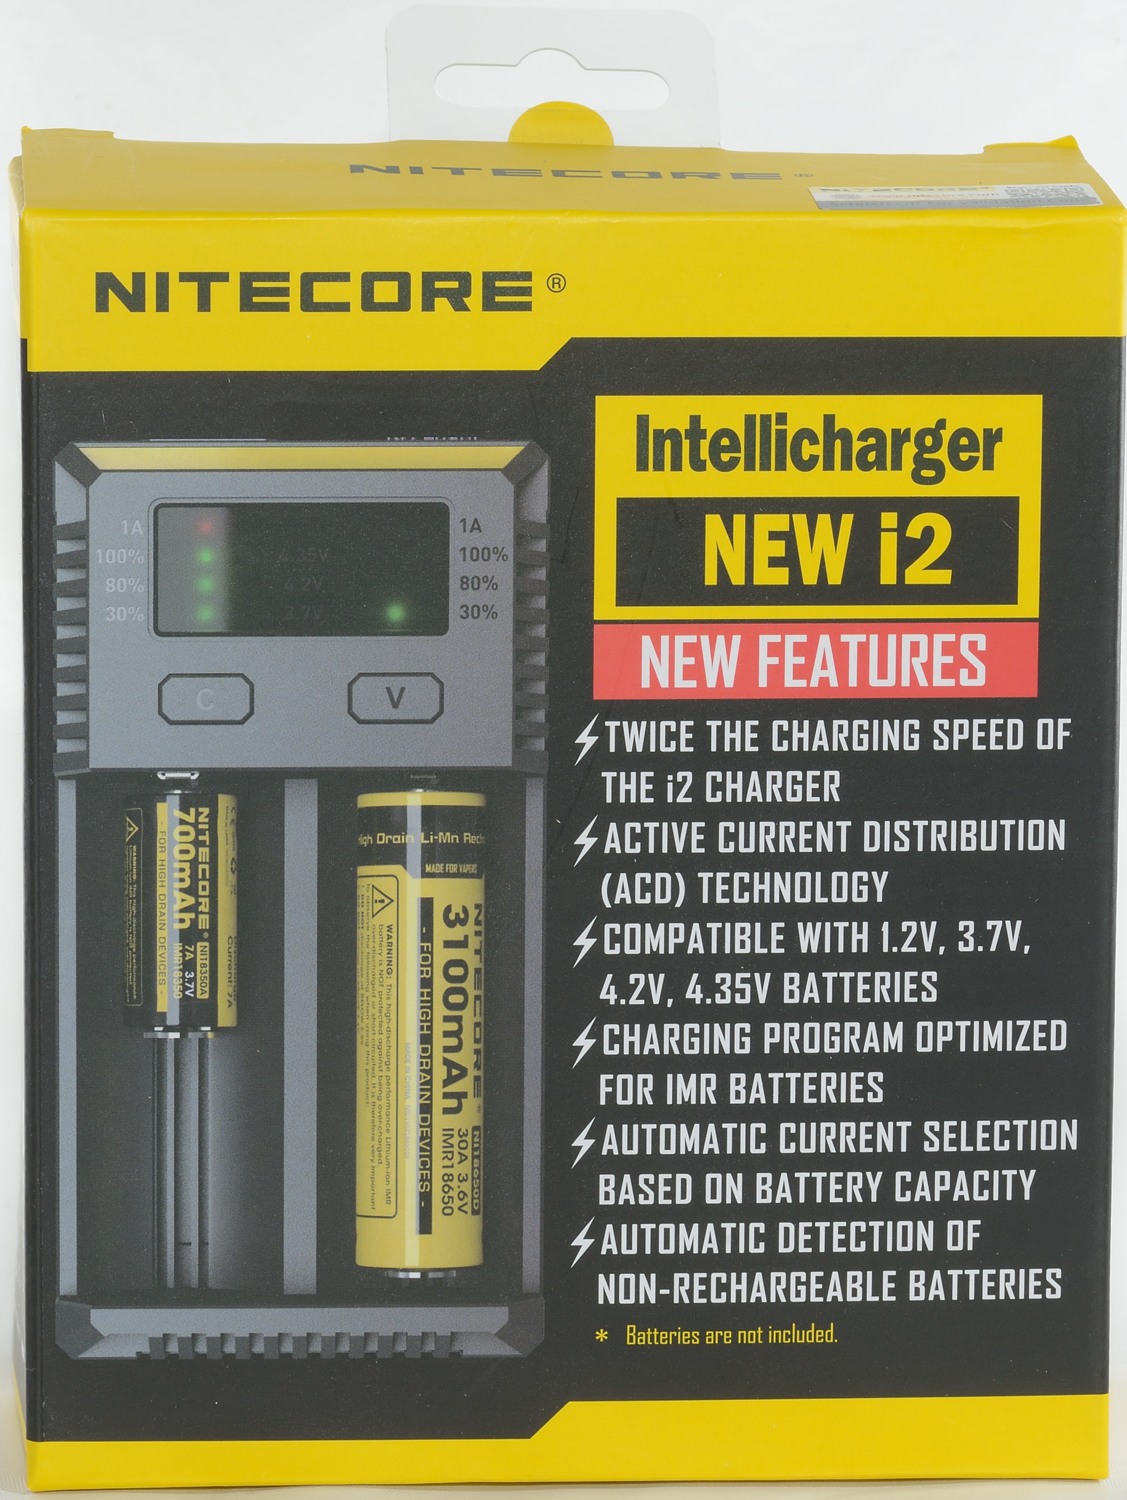 Review of Charger Nitecore Intellicharger new i2 2016